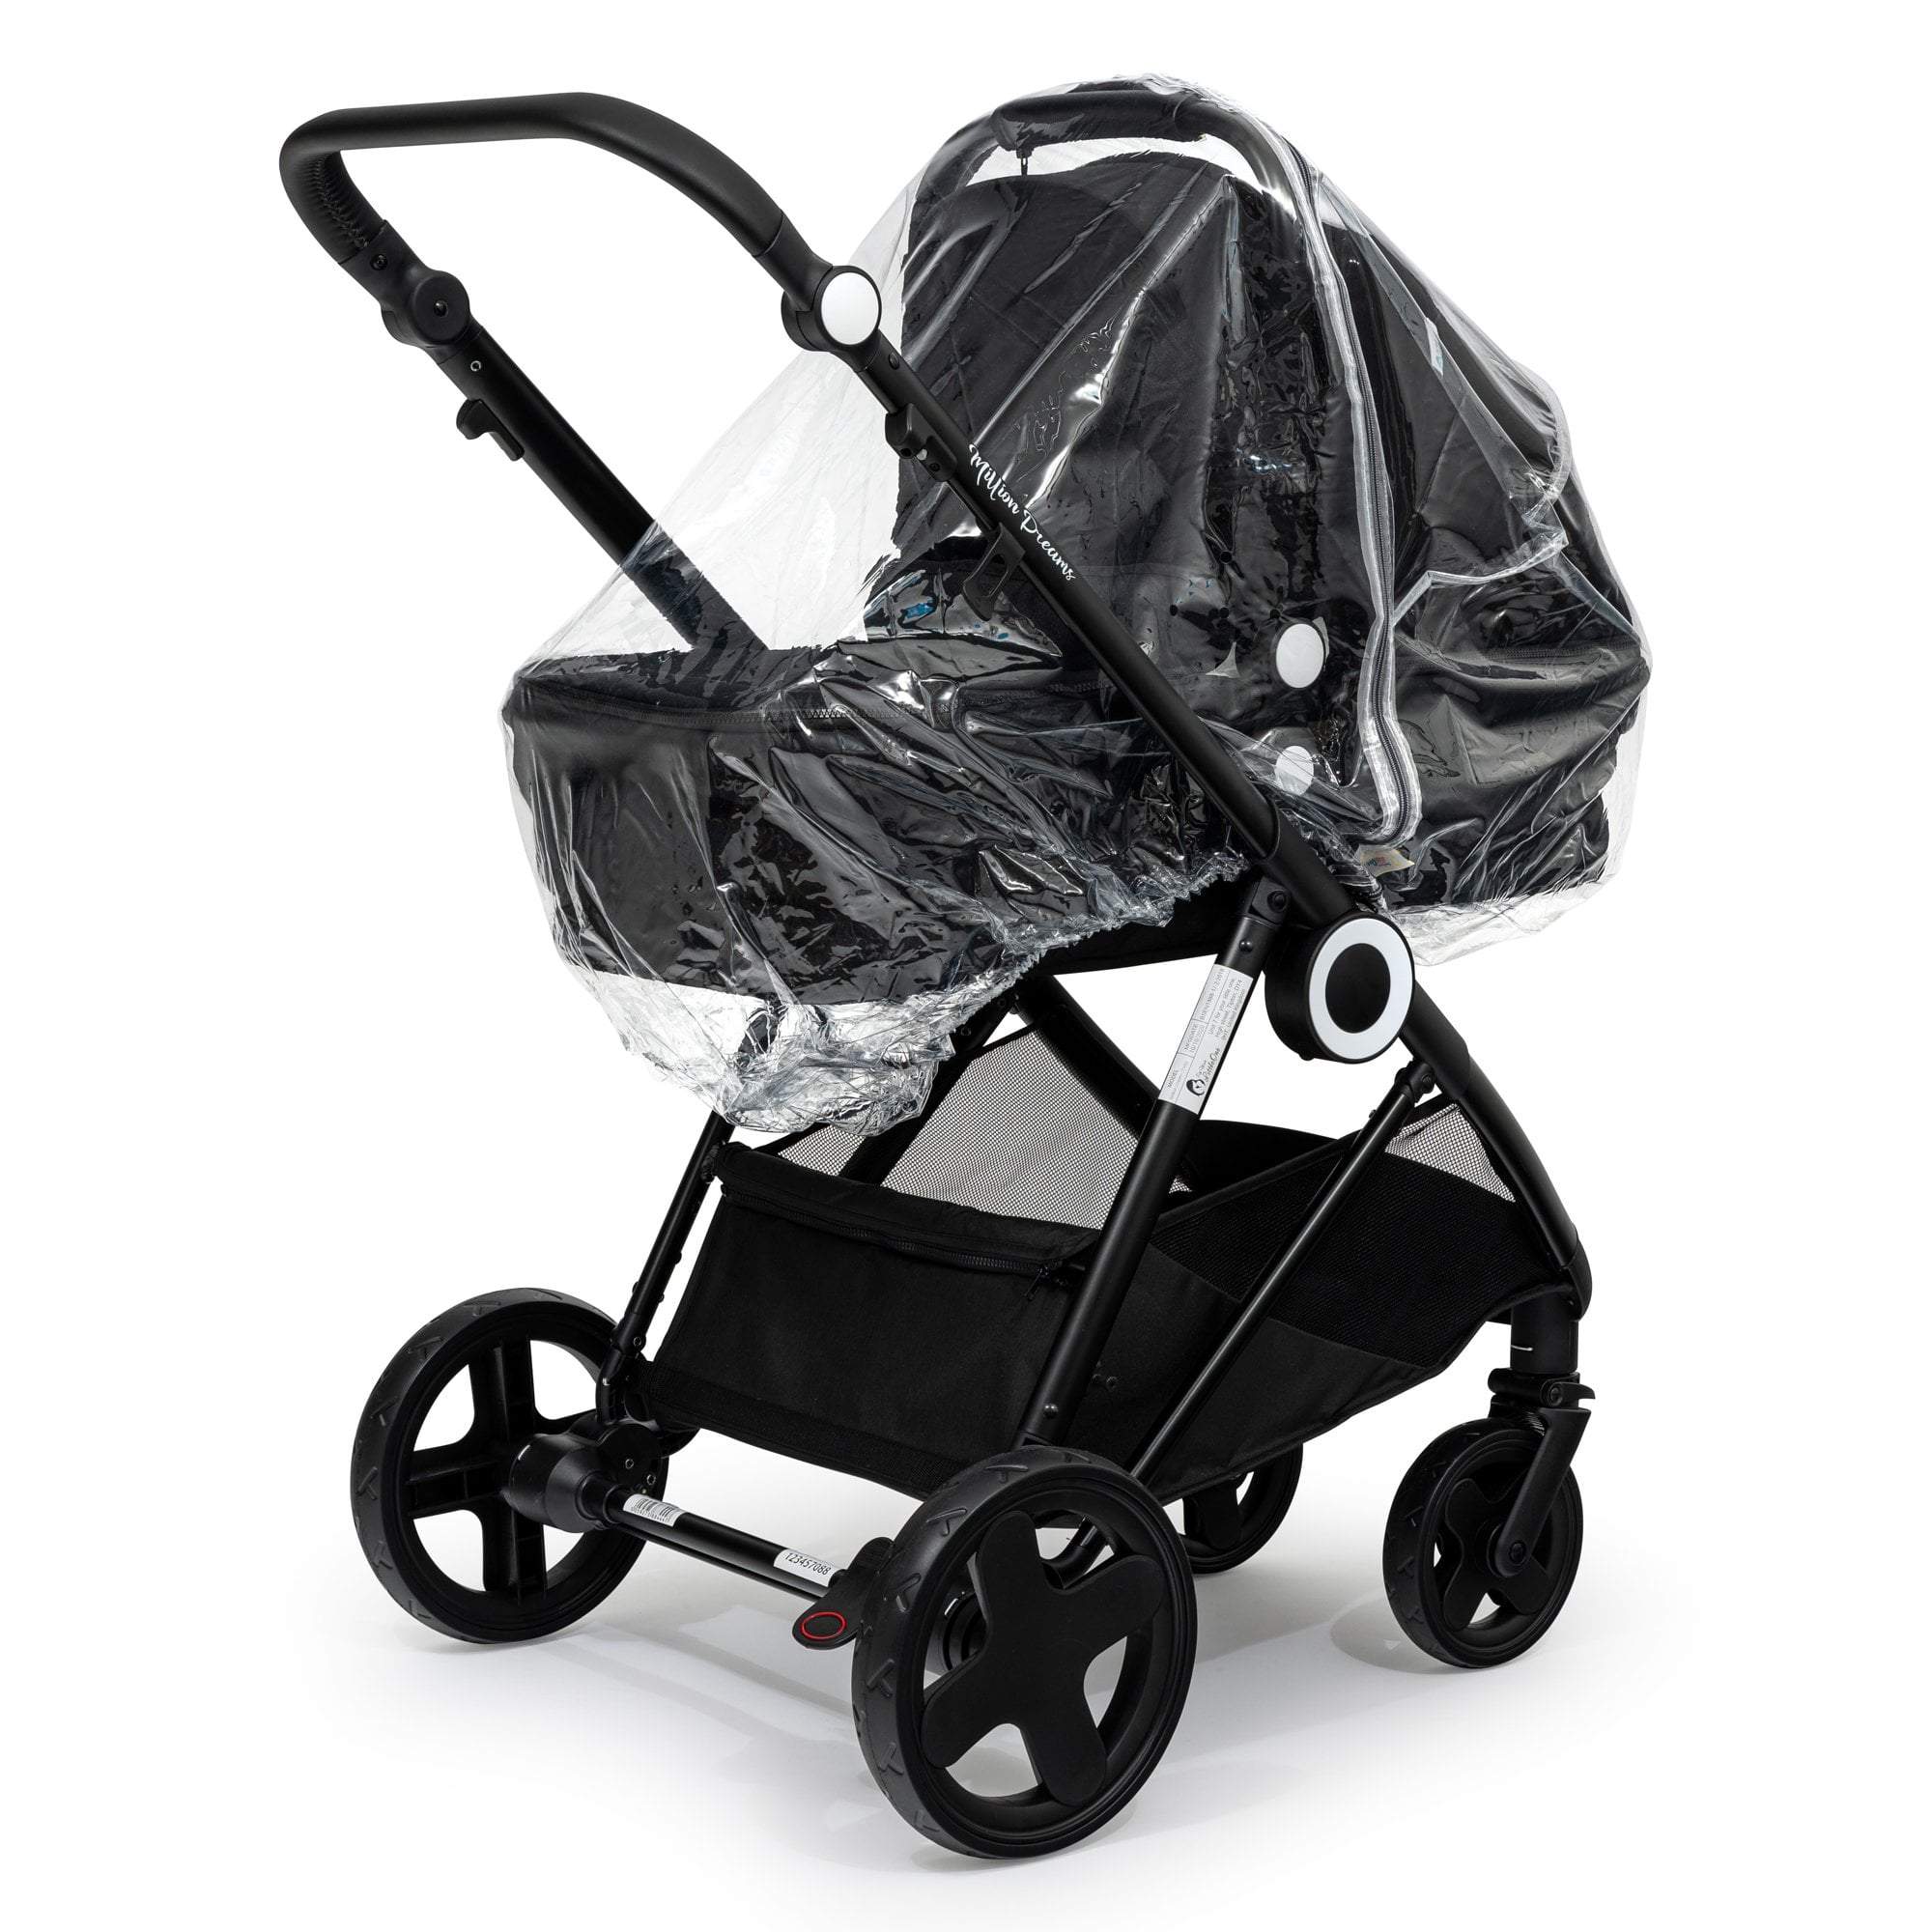 Carrycot Raincover Compatible With BabyStyle - Fits All Models - For Your Little One